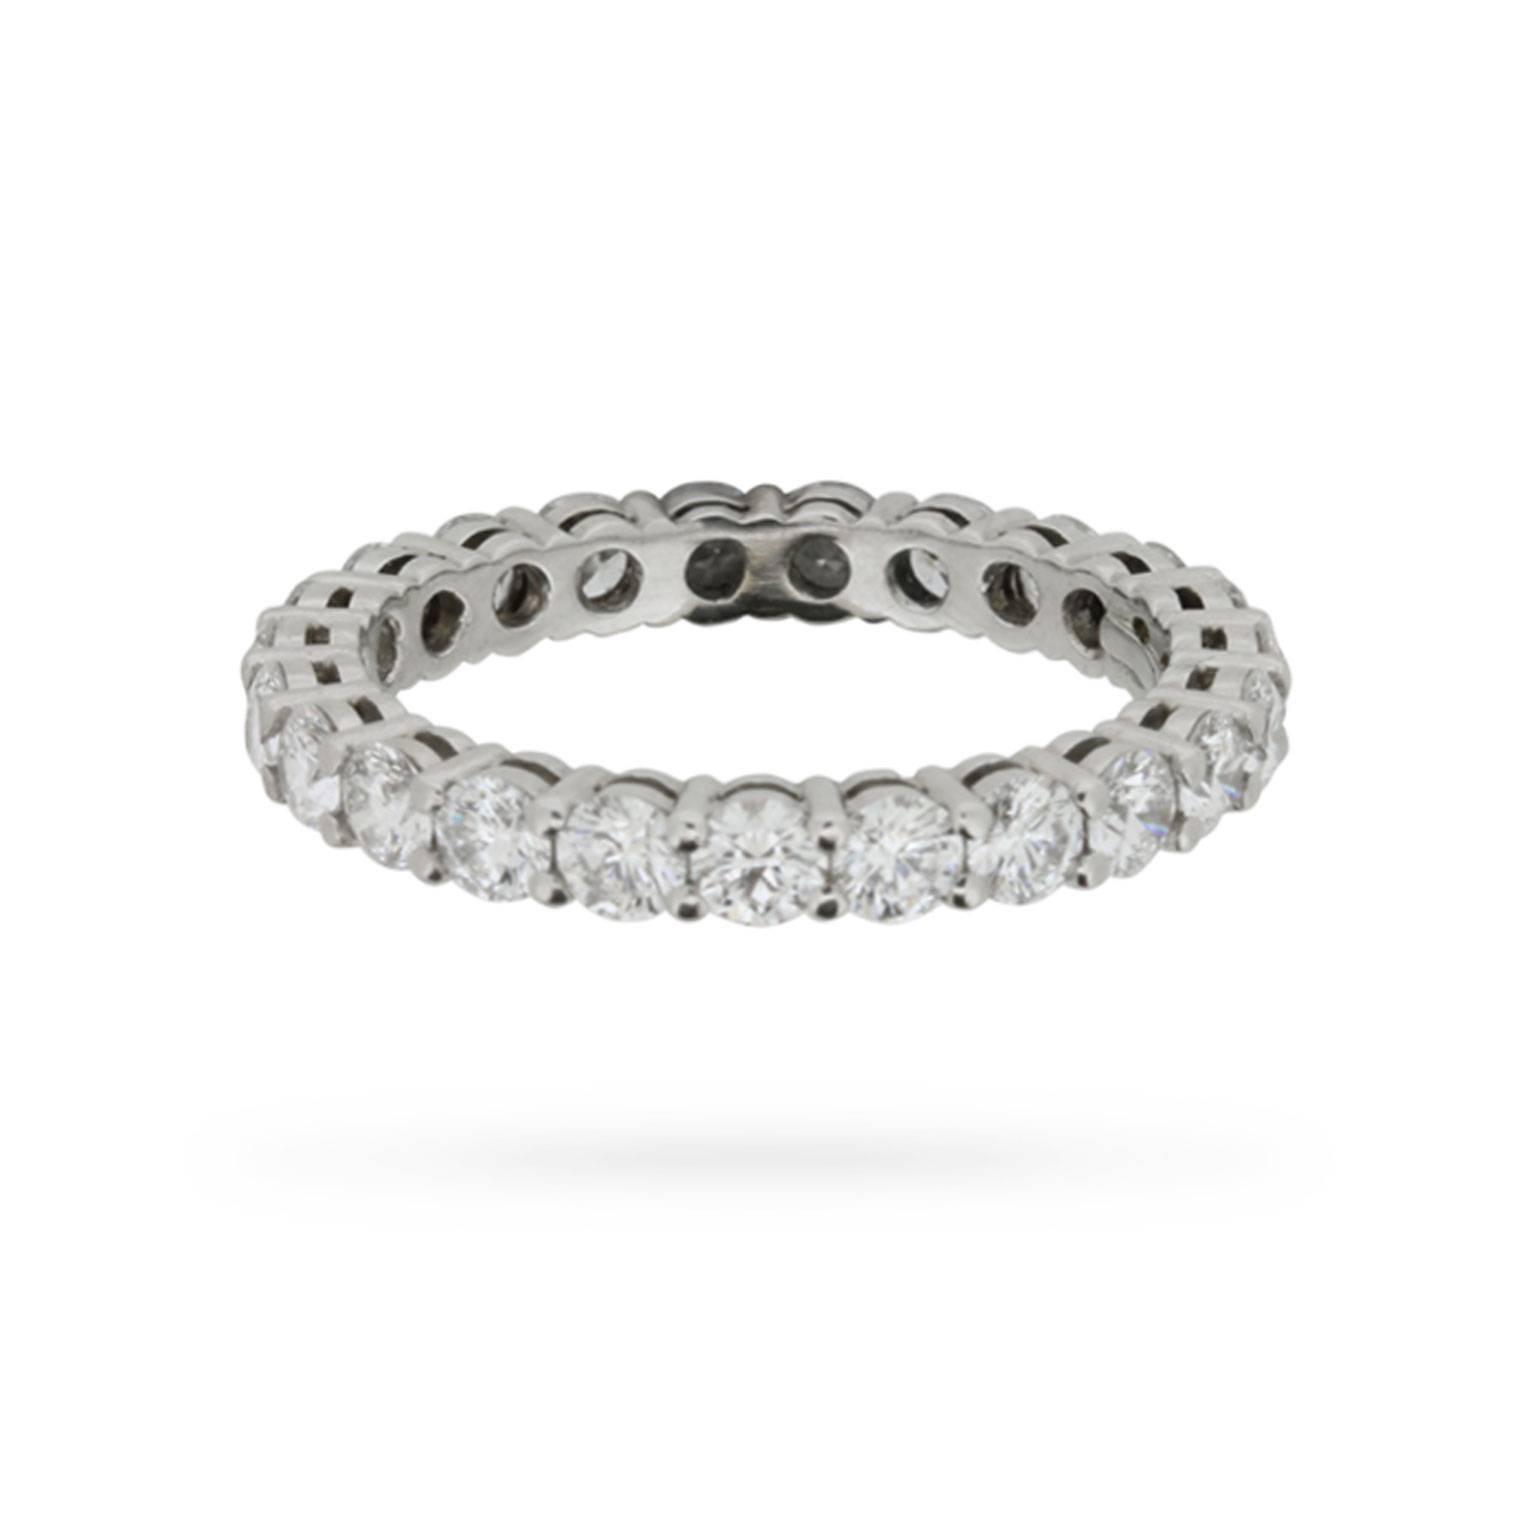 This classic Tiffany & Co. eternity ring is set full circle with exquisite E colour, VVS clarity, round brilliant cut diamonds totalling 1.87 carats.

The diamonds are hand-set in shared claw mountings fashioned in beautiful and durable platinum.